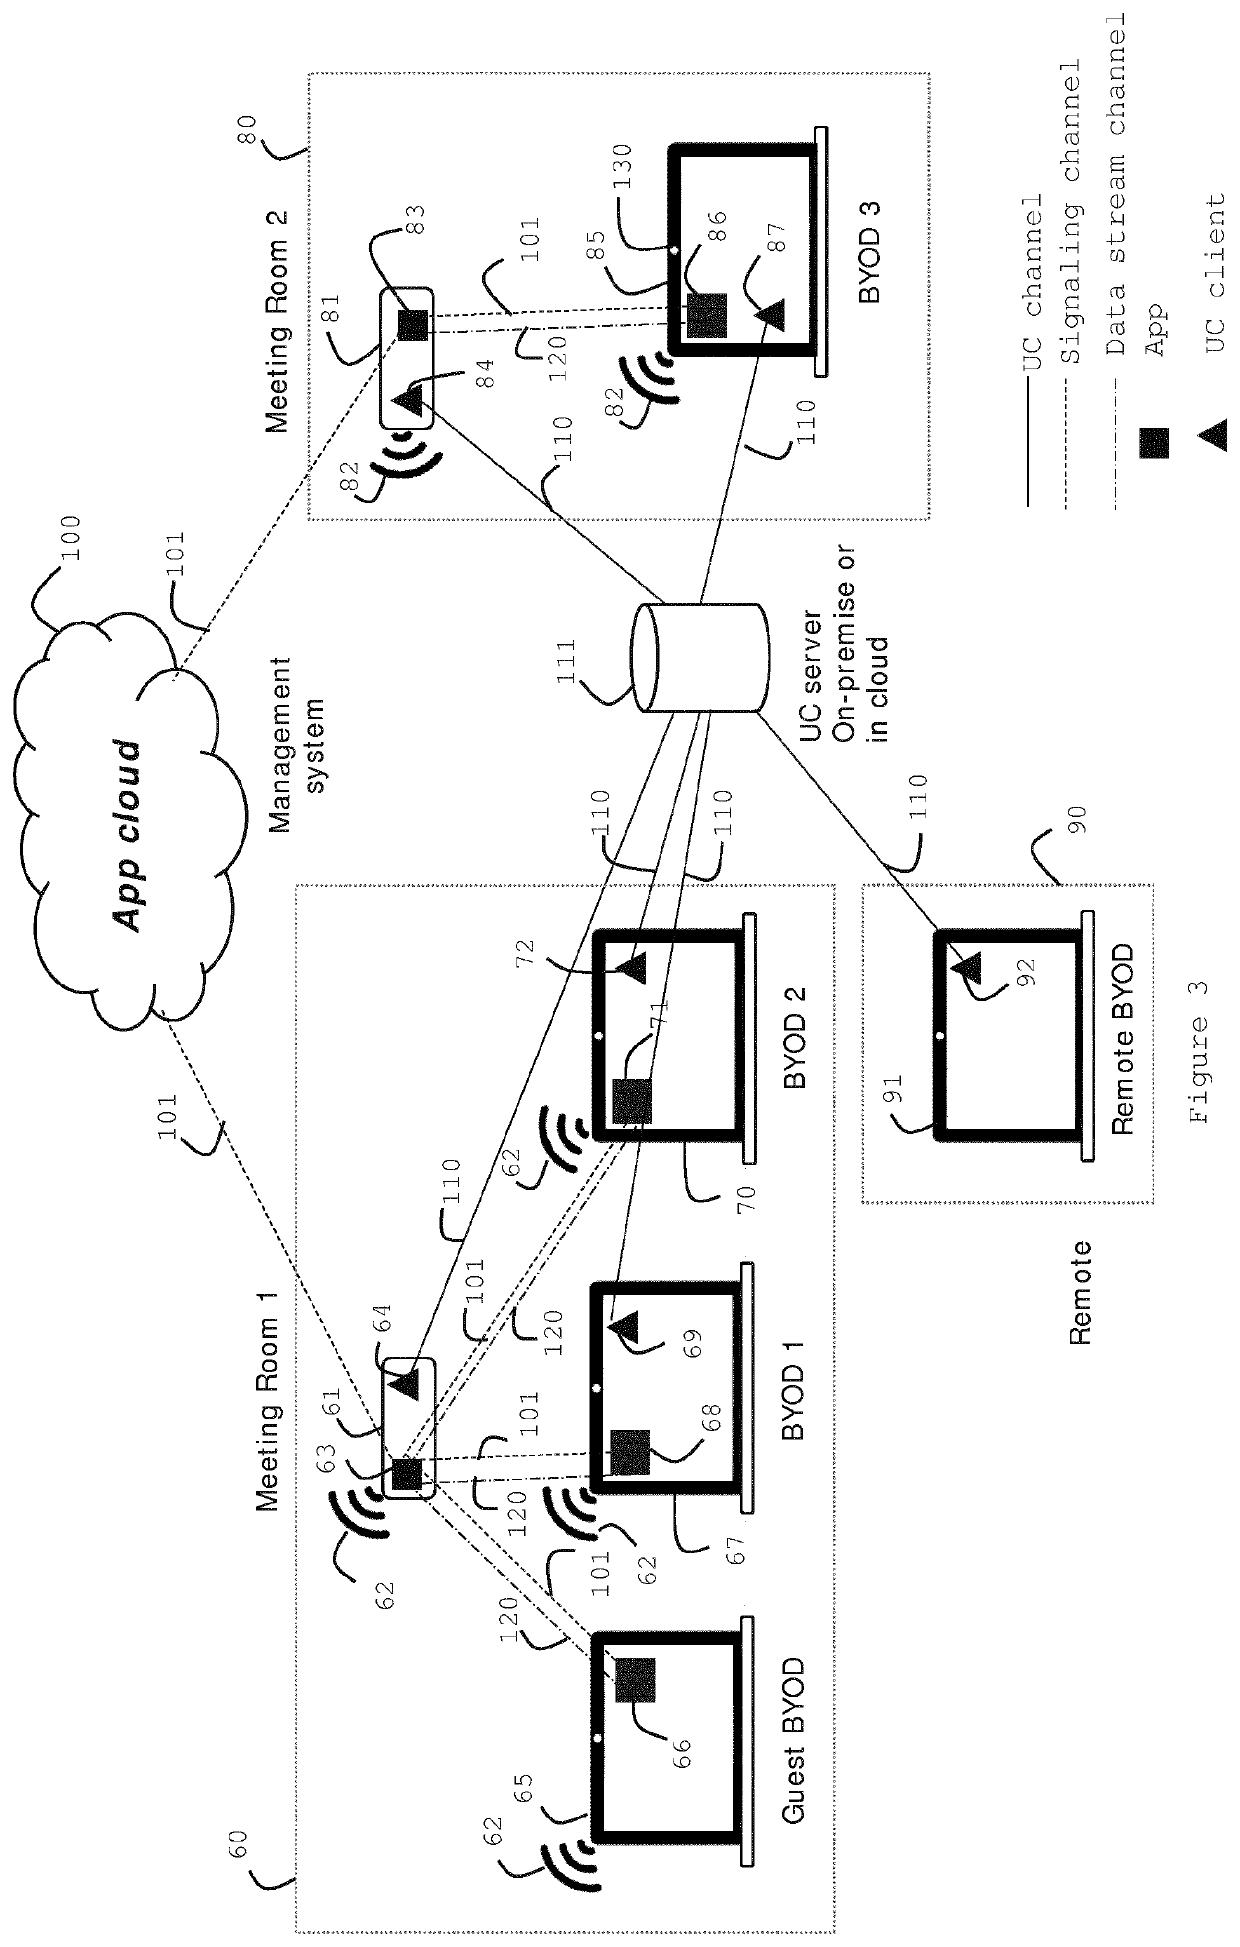 User-centric connections to a location comprising digital collaboration tools